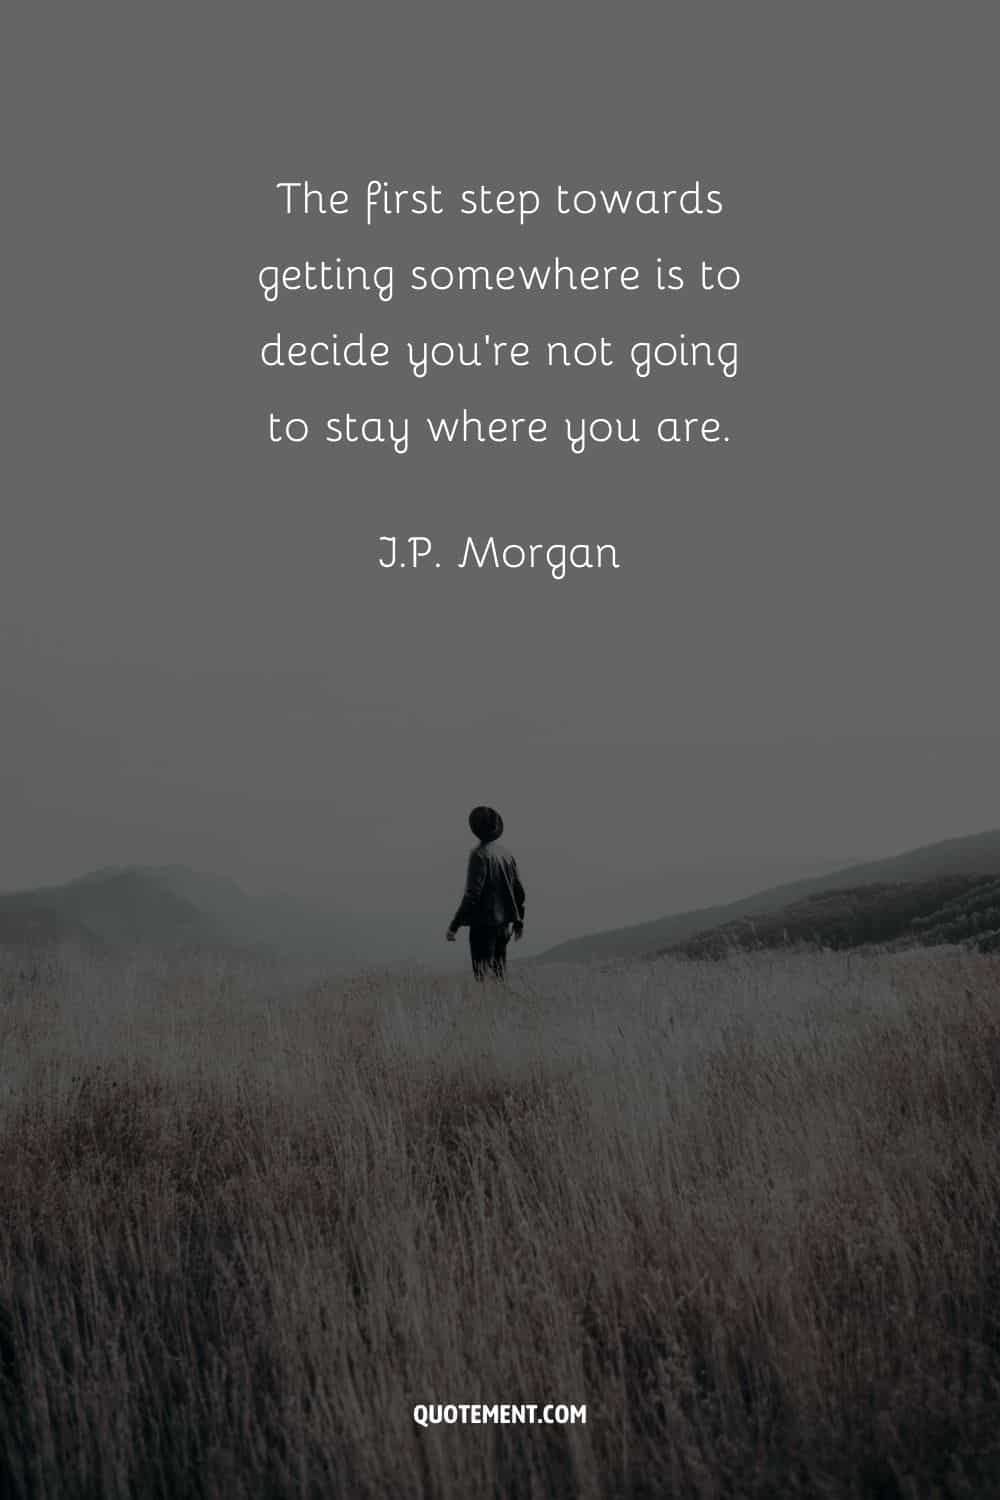 “The first step towards getting somewhere is to decide you’re not going to stay where you are.” — J.P. Morgan